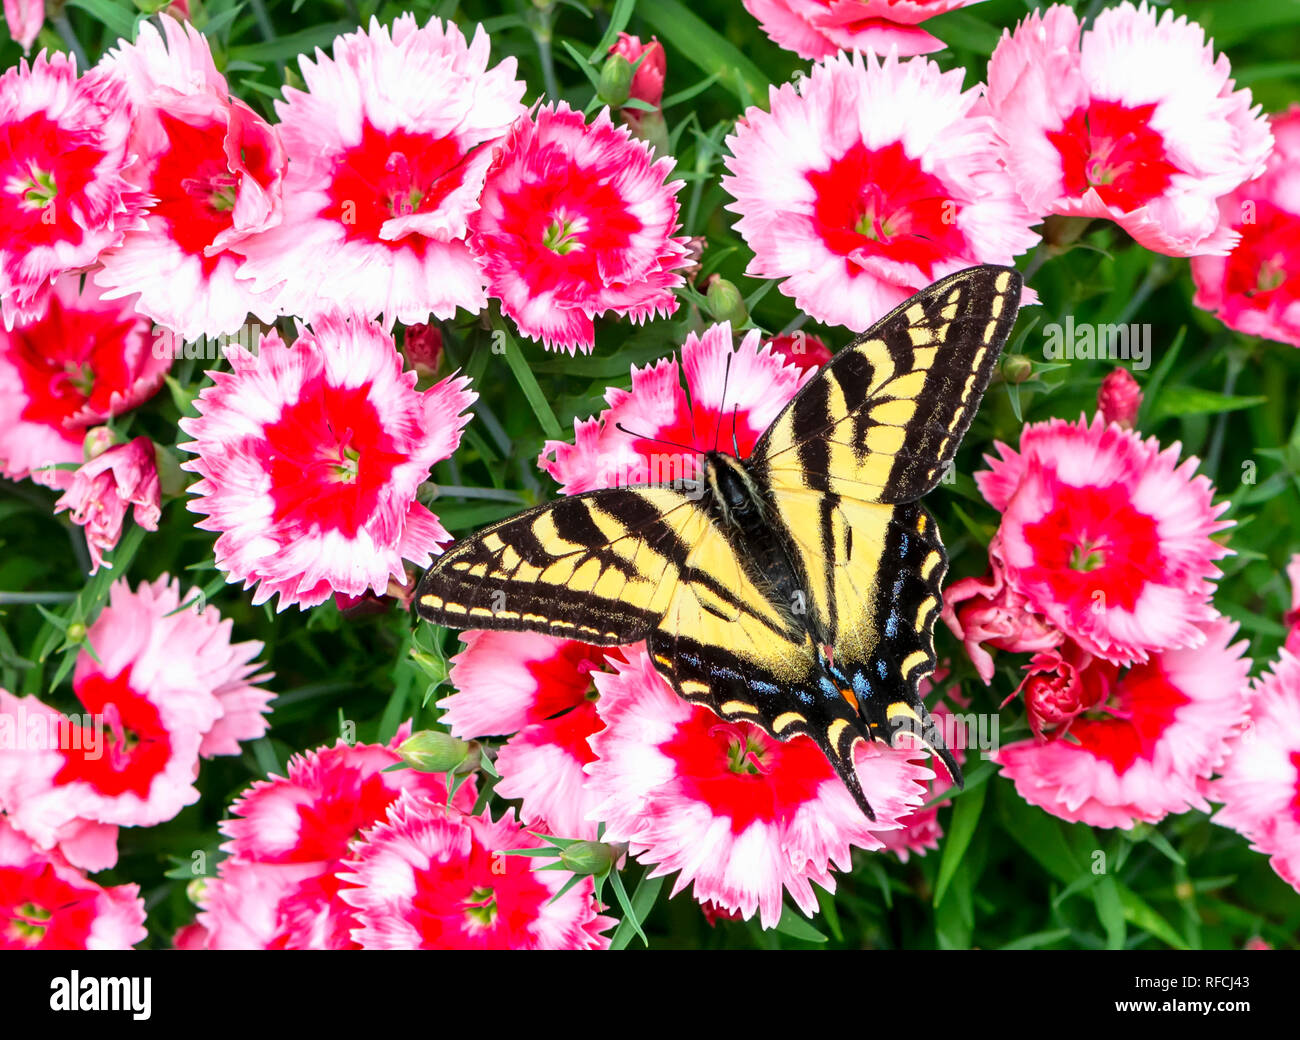 Tiger swallowtail butterfly Papilionidae - Western tiger swallowtail with wings spread, feeding pink dianthus flowers Stock Photo